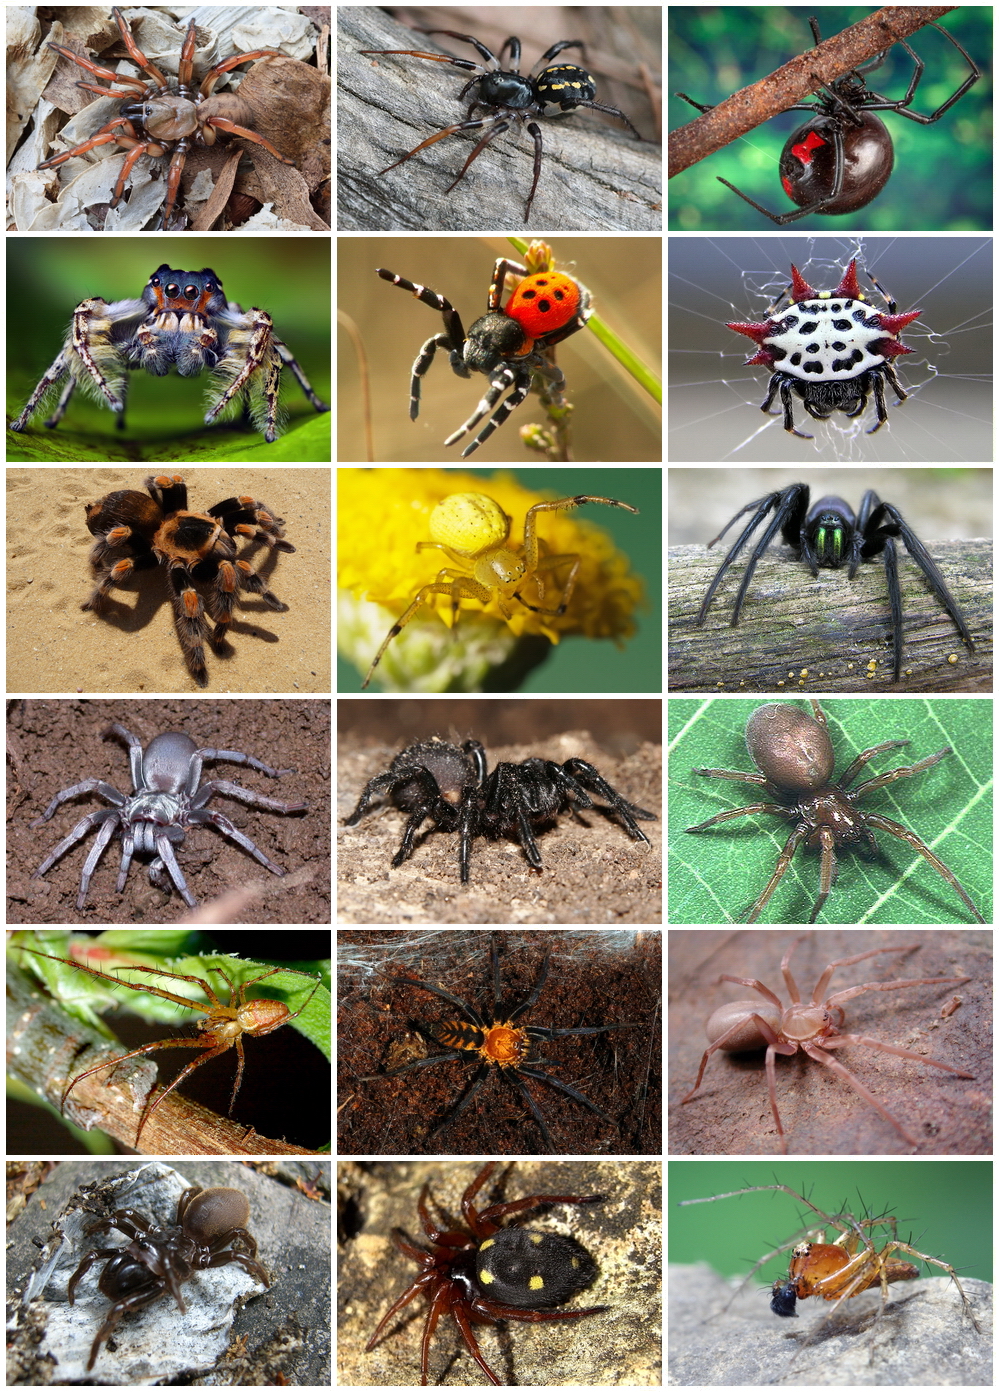 all-about-spiders-basics-body-behavior-welcome-wildlife